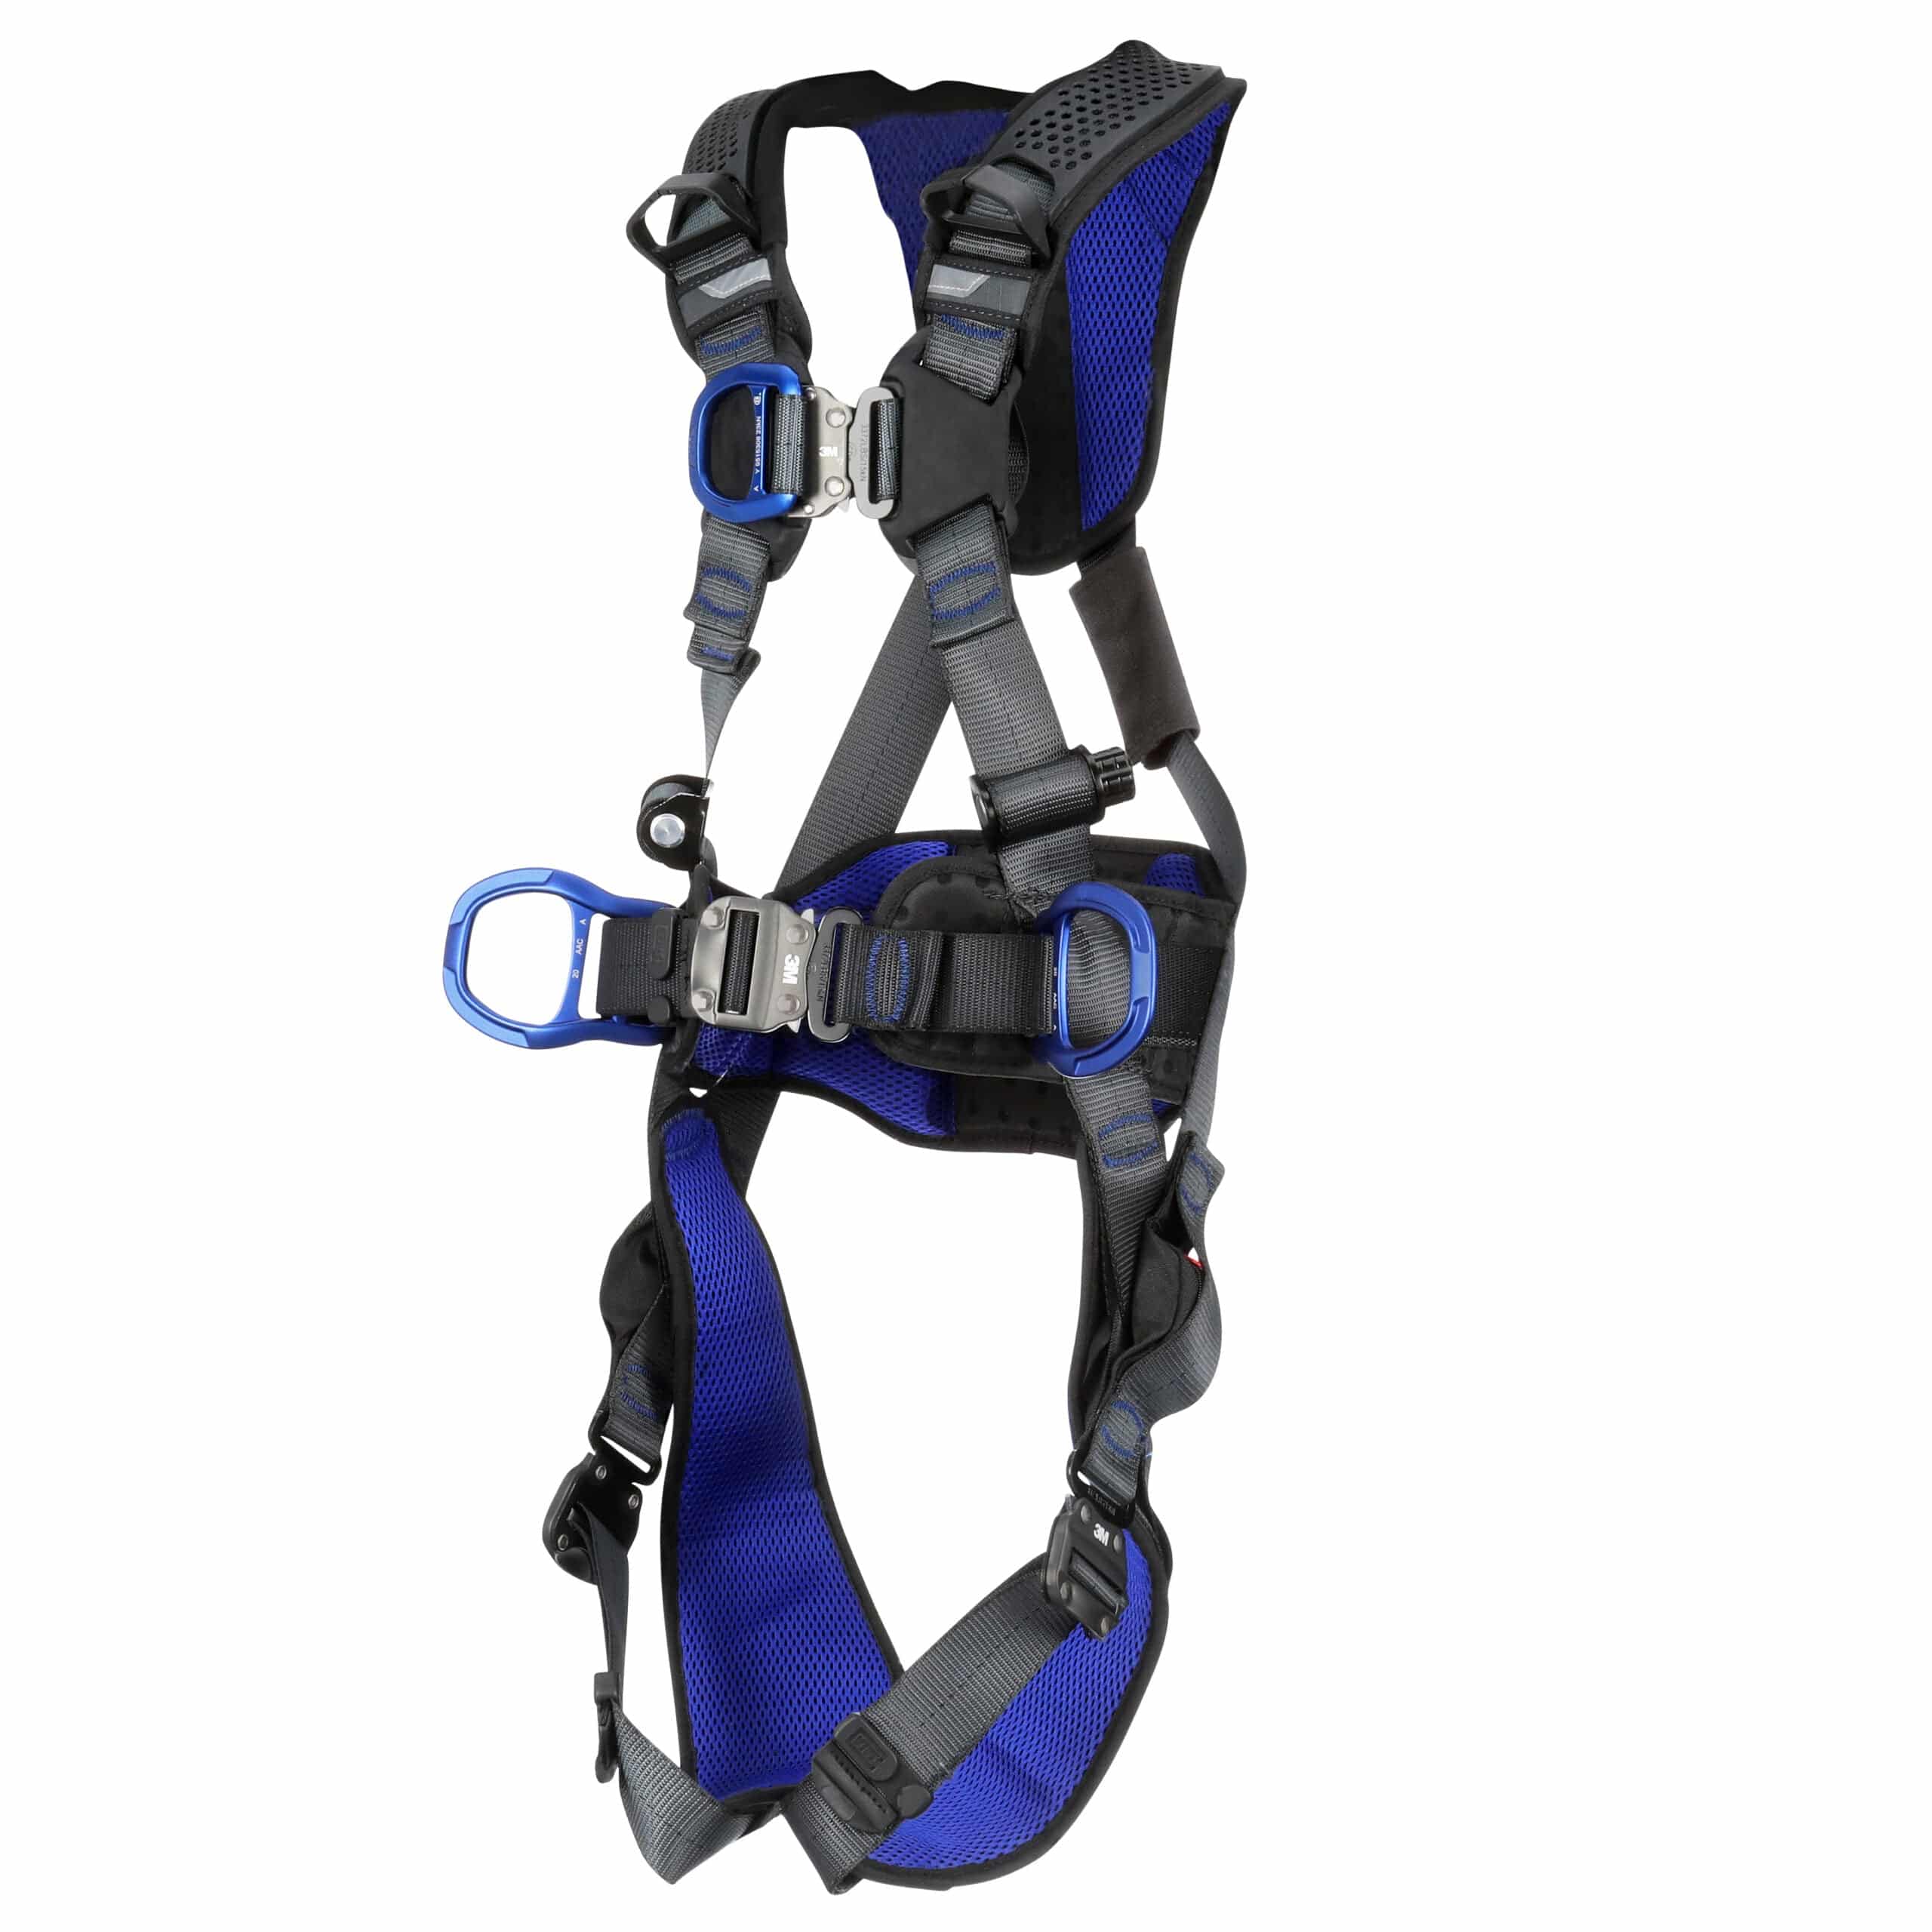 3M DBI SALA ExoFit XE200 Quick Connect Comfort Positioning Safety Harness - SecureHeights